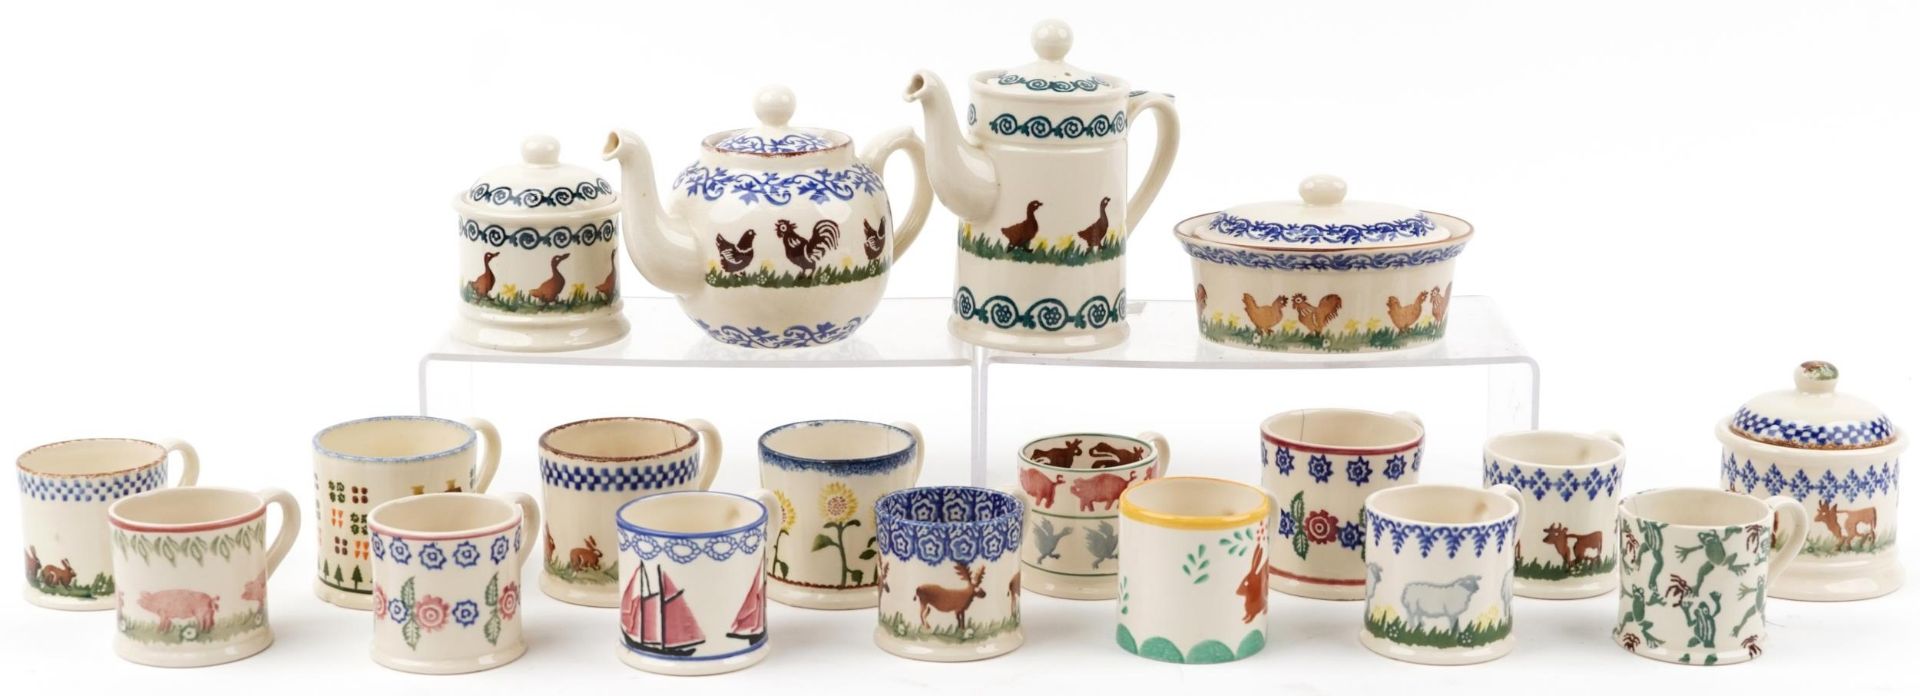 Brixton pottery hand painted with animals including mugs, storage jars and teapot, the largest 21.